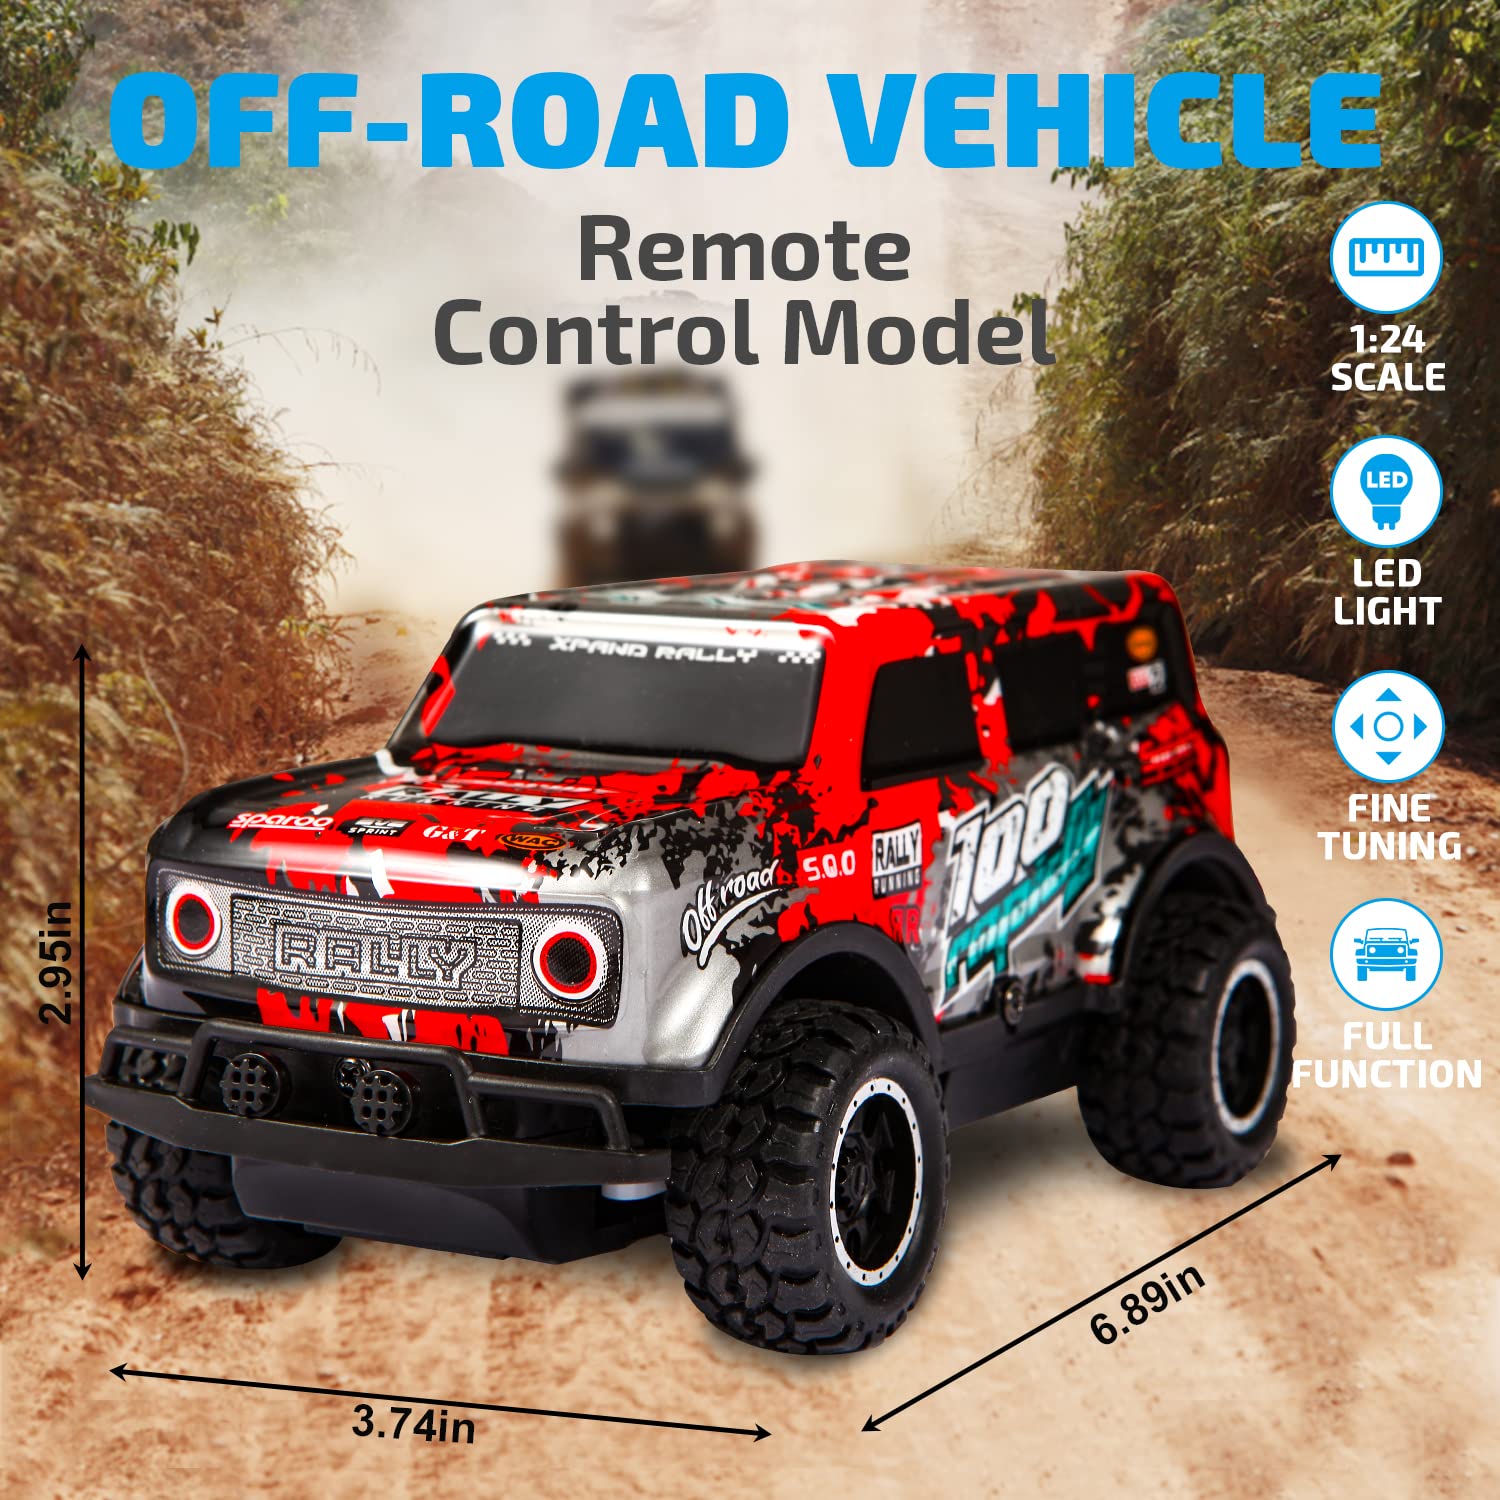 Remote Control Car, 1/24 Scale Light Up Racing Car Toys, RC Car for Kids with Cool Led Lights, Hobby RC Cars Toys Birthday Gifts for 3 4 5 6 7 8 Year Old Boys Girls